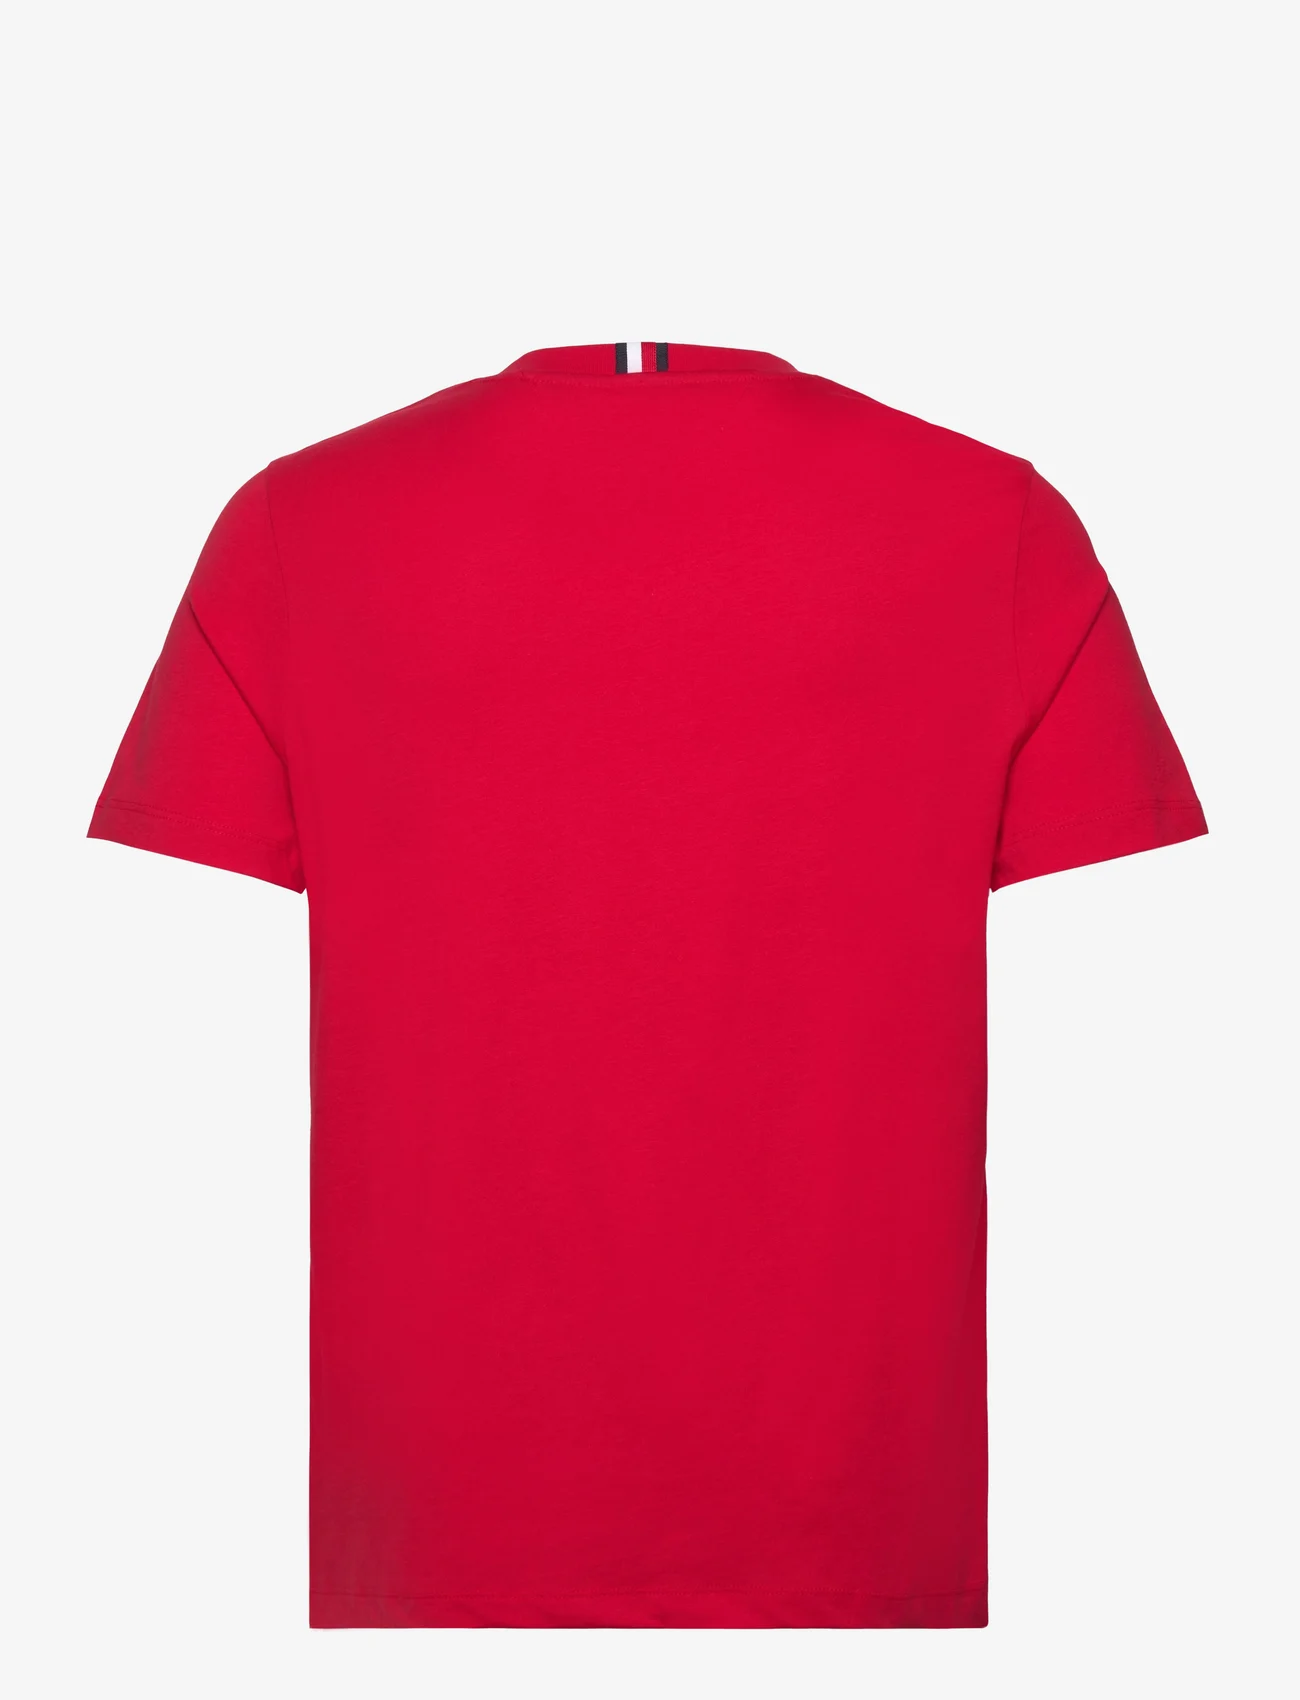 Tommy Hilfiger - MONOGRAM IMD TEE - basic t-shirts - primary red - 1